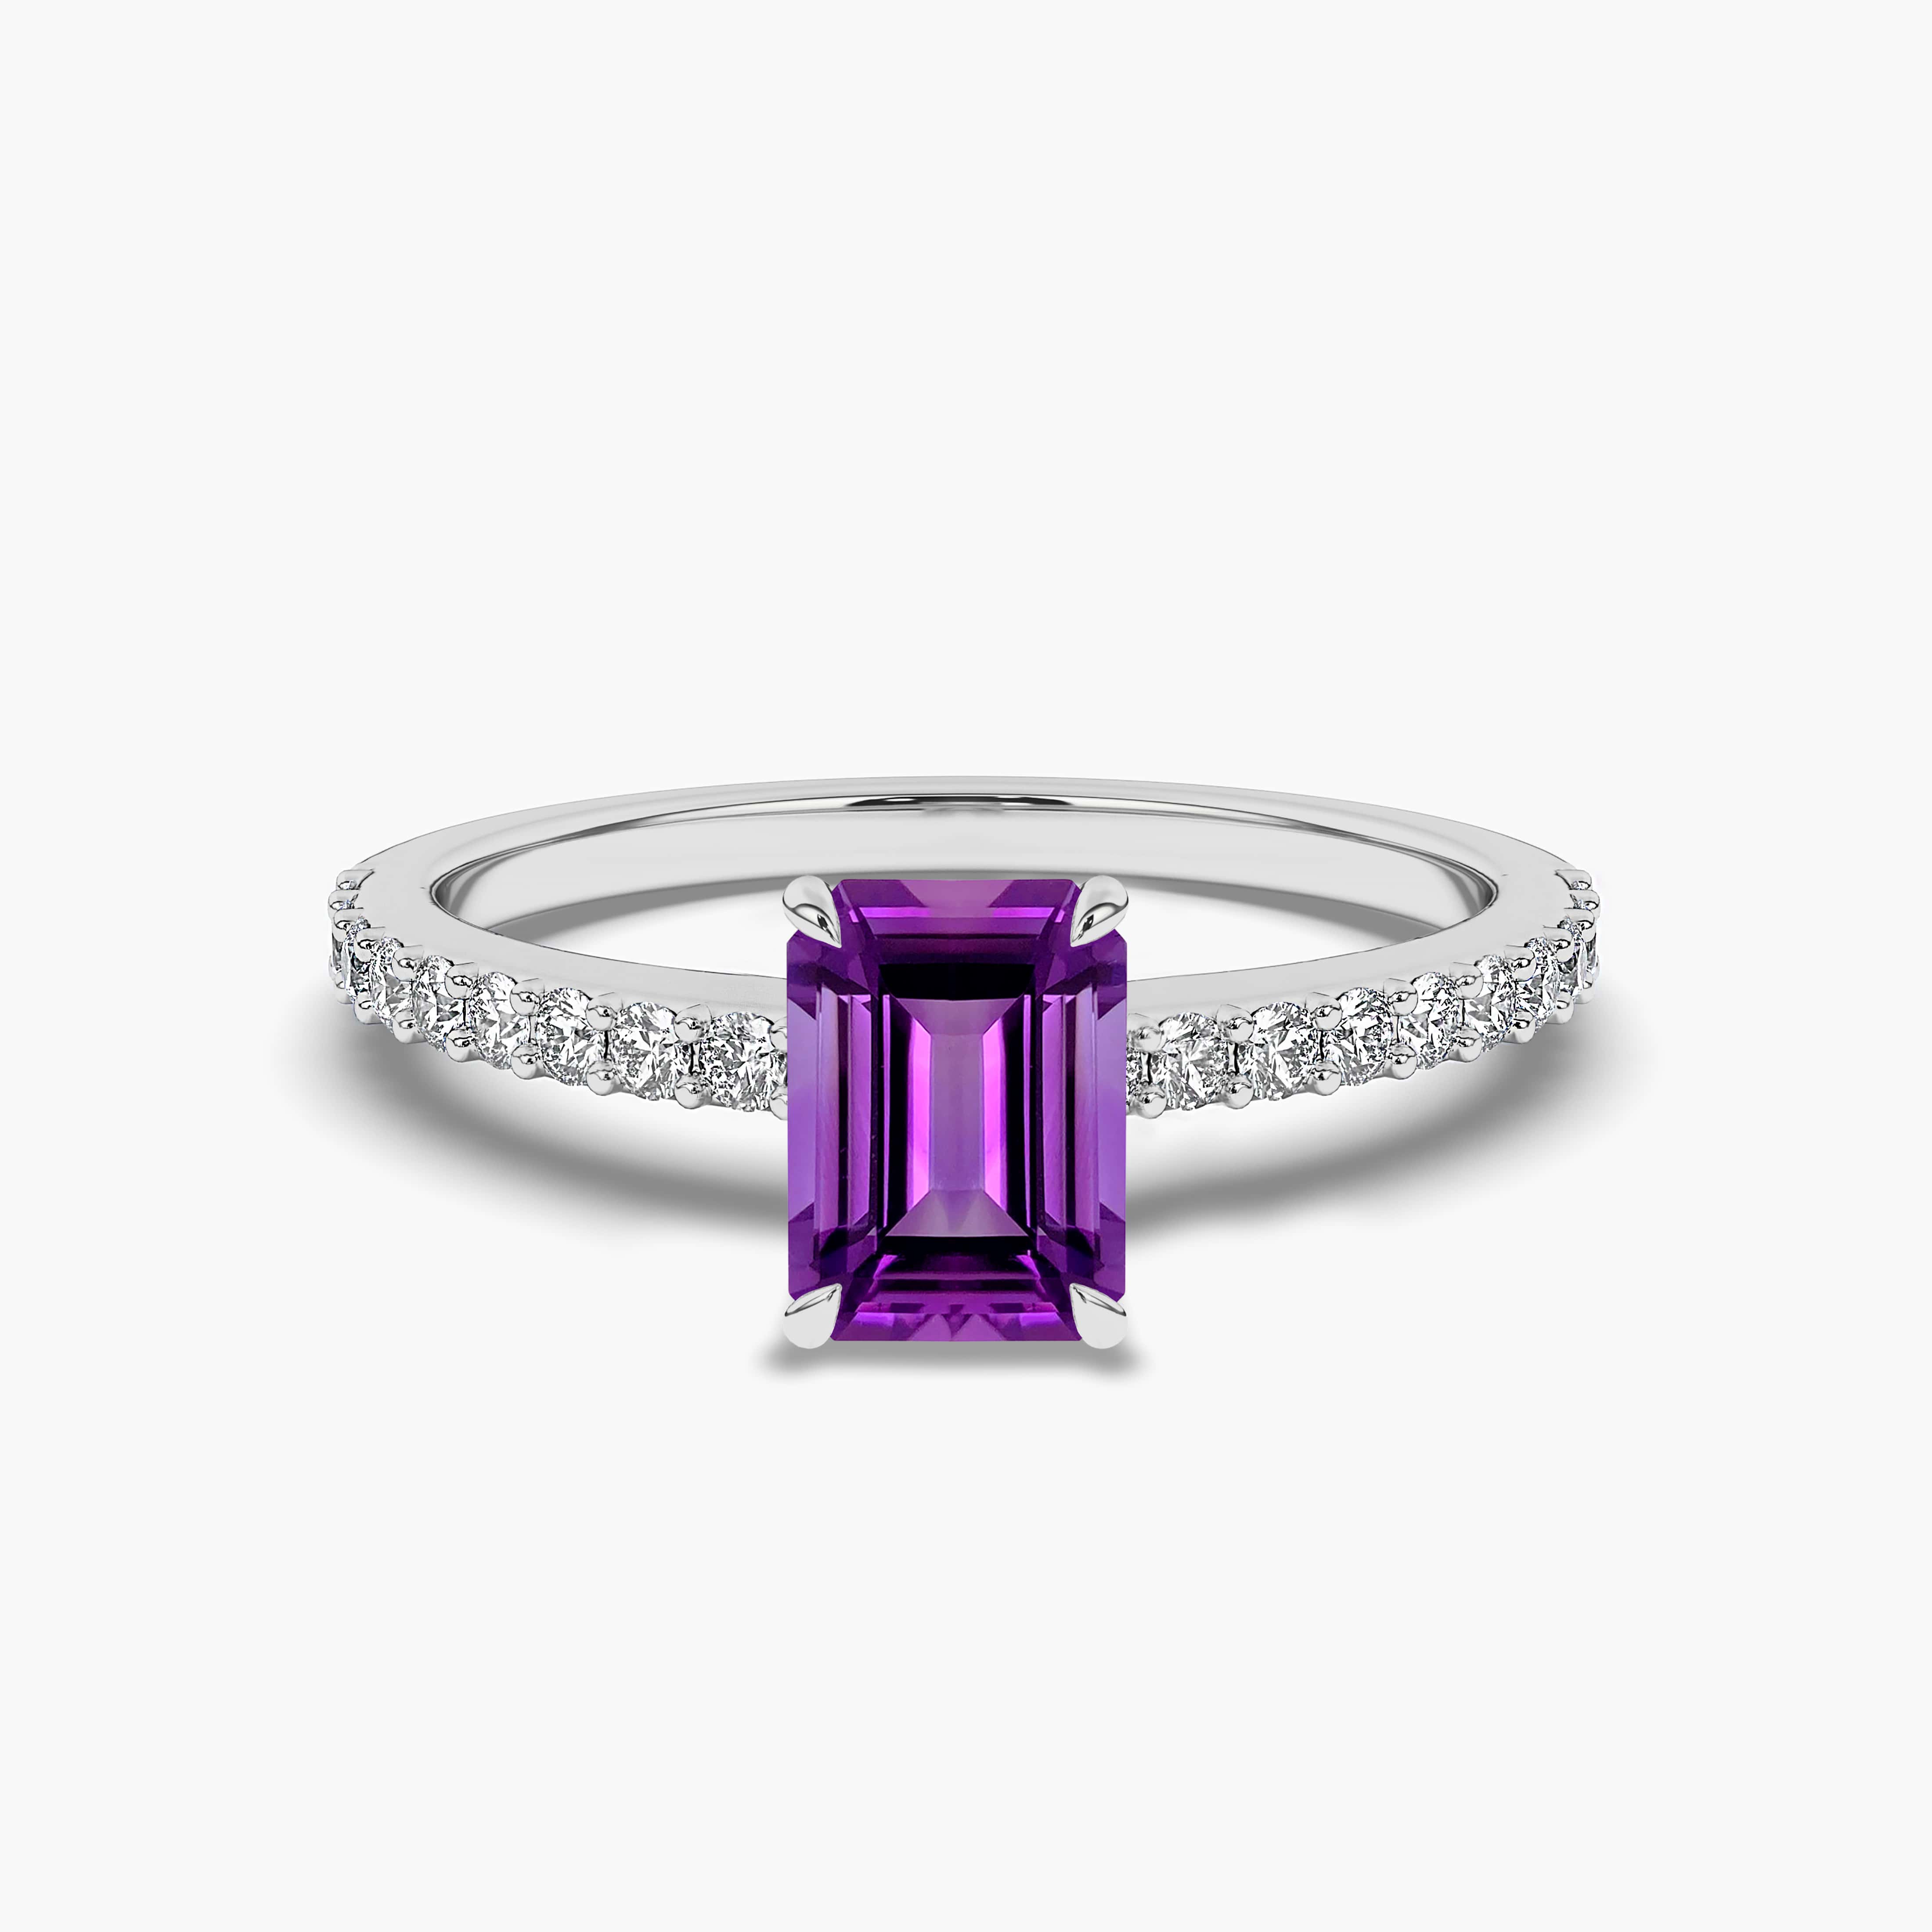 Emerald Cut Amethyst with Gemstone Side Stone Ring White Gold For Woman